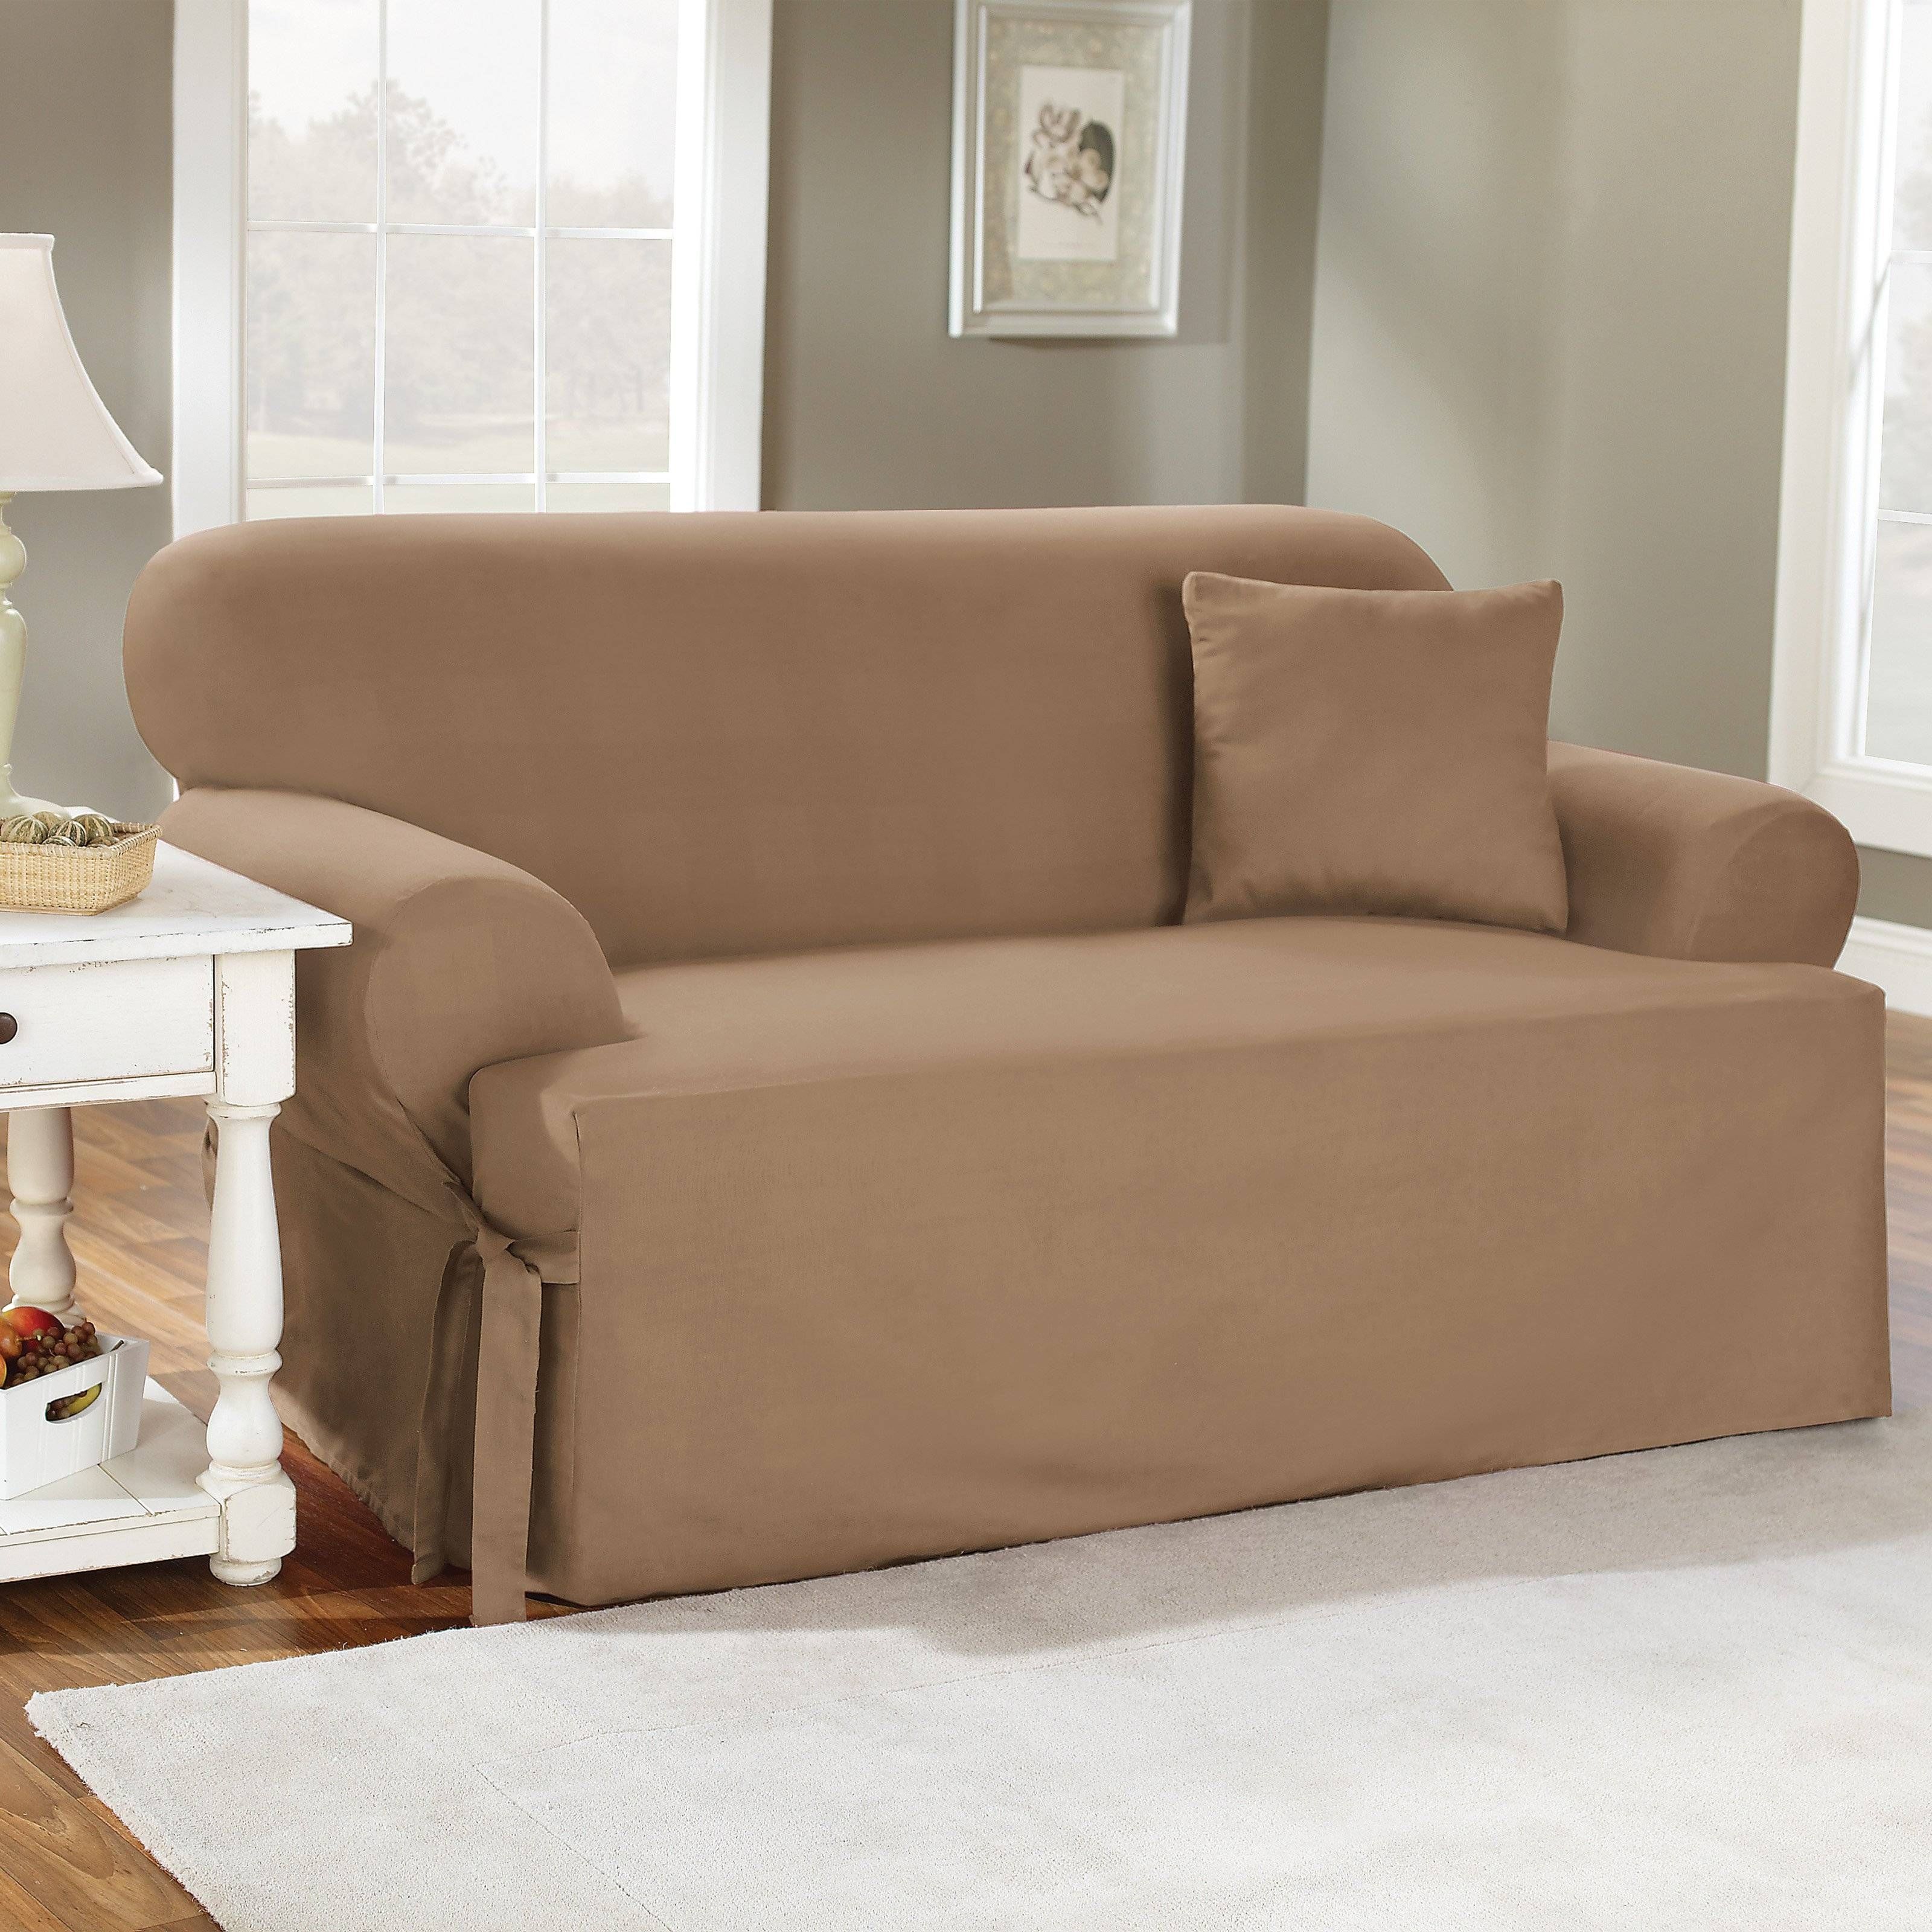 Tailor Fit Stretch Fit Sofa Slipcover | Hayneedle Inside Stretch Slipcovers For Sofas (View 12 of 15)